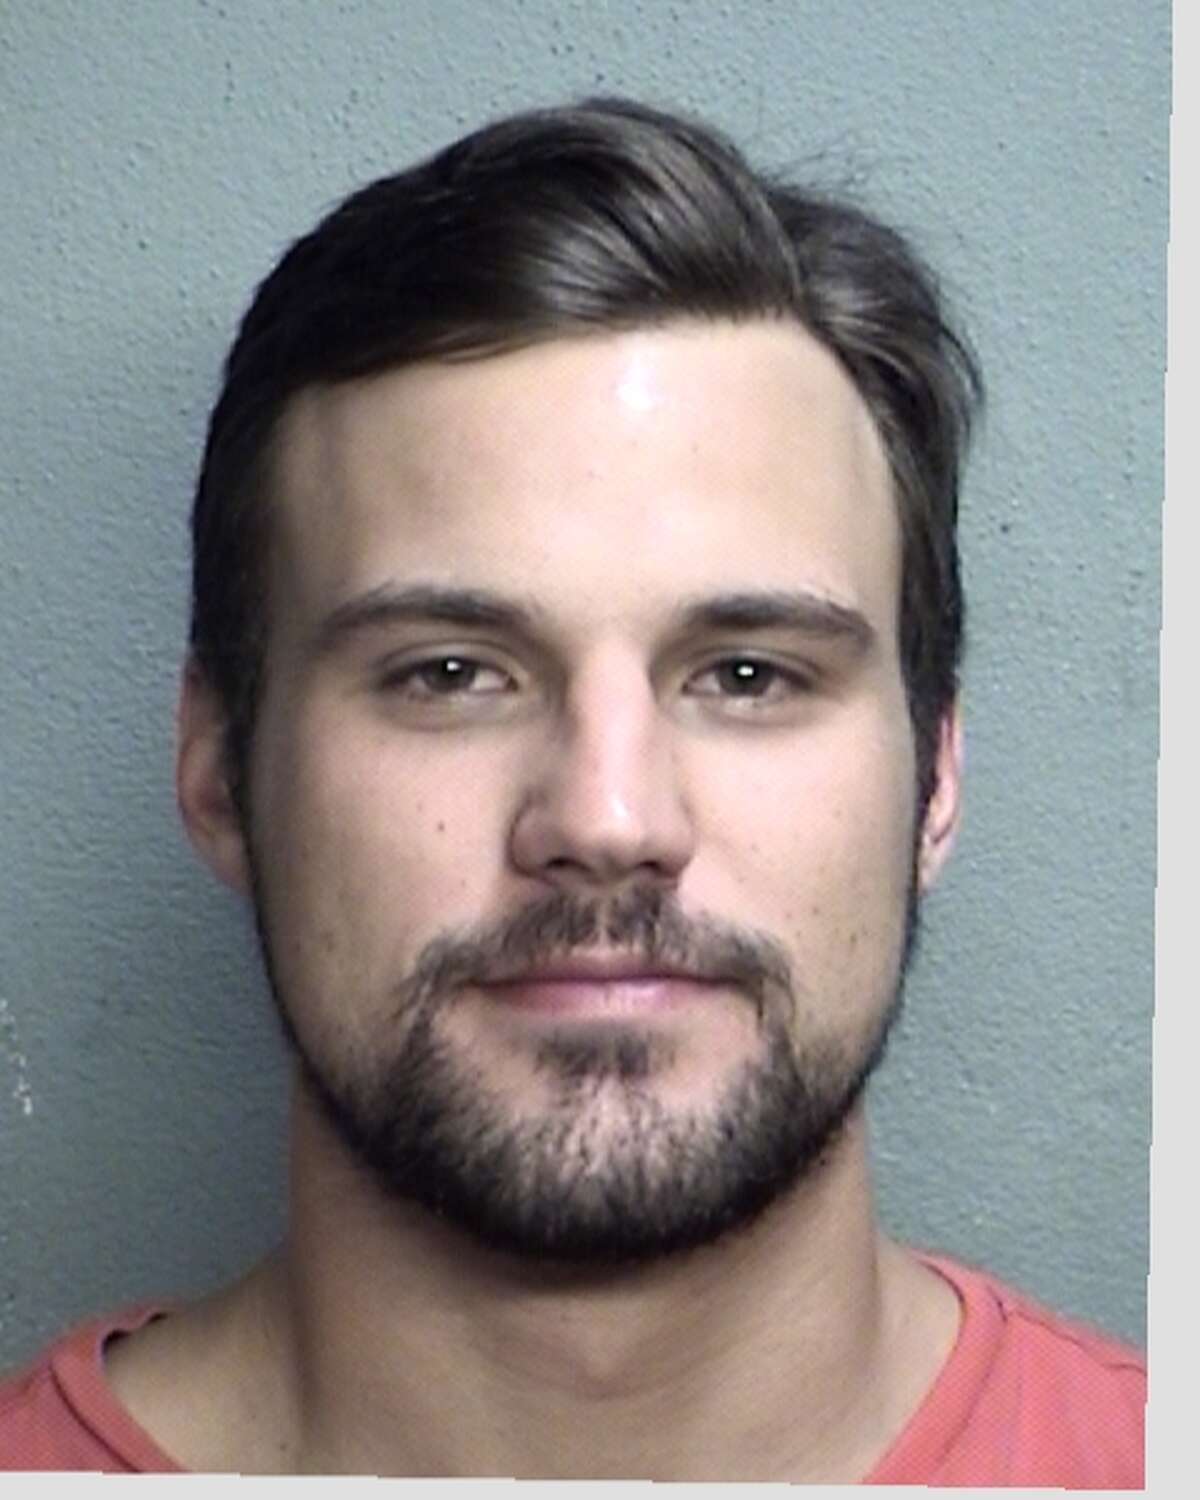 College Station resident Samuel Patterson, 21, was arrested on Saturday, Aug. 20, 2016 for possession of LSD and MDMA at the house of Texas A&M fraternity Sigma Nu, where authorities found a 19-year-old fraternity member unconscious and not breathing. The teen was later pronounced dead at the College Station Medical Center.